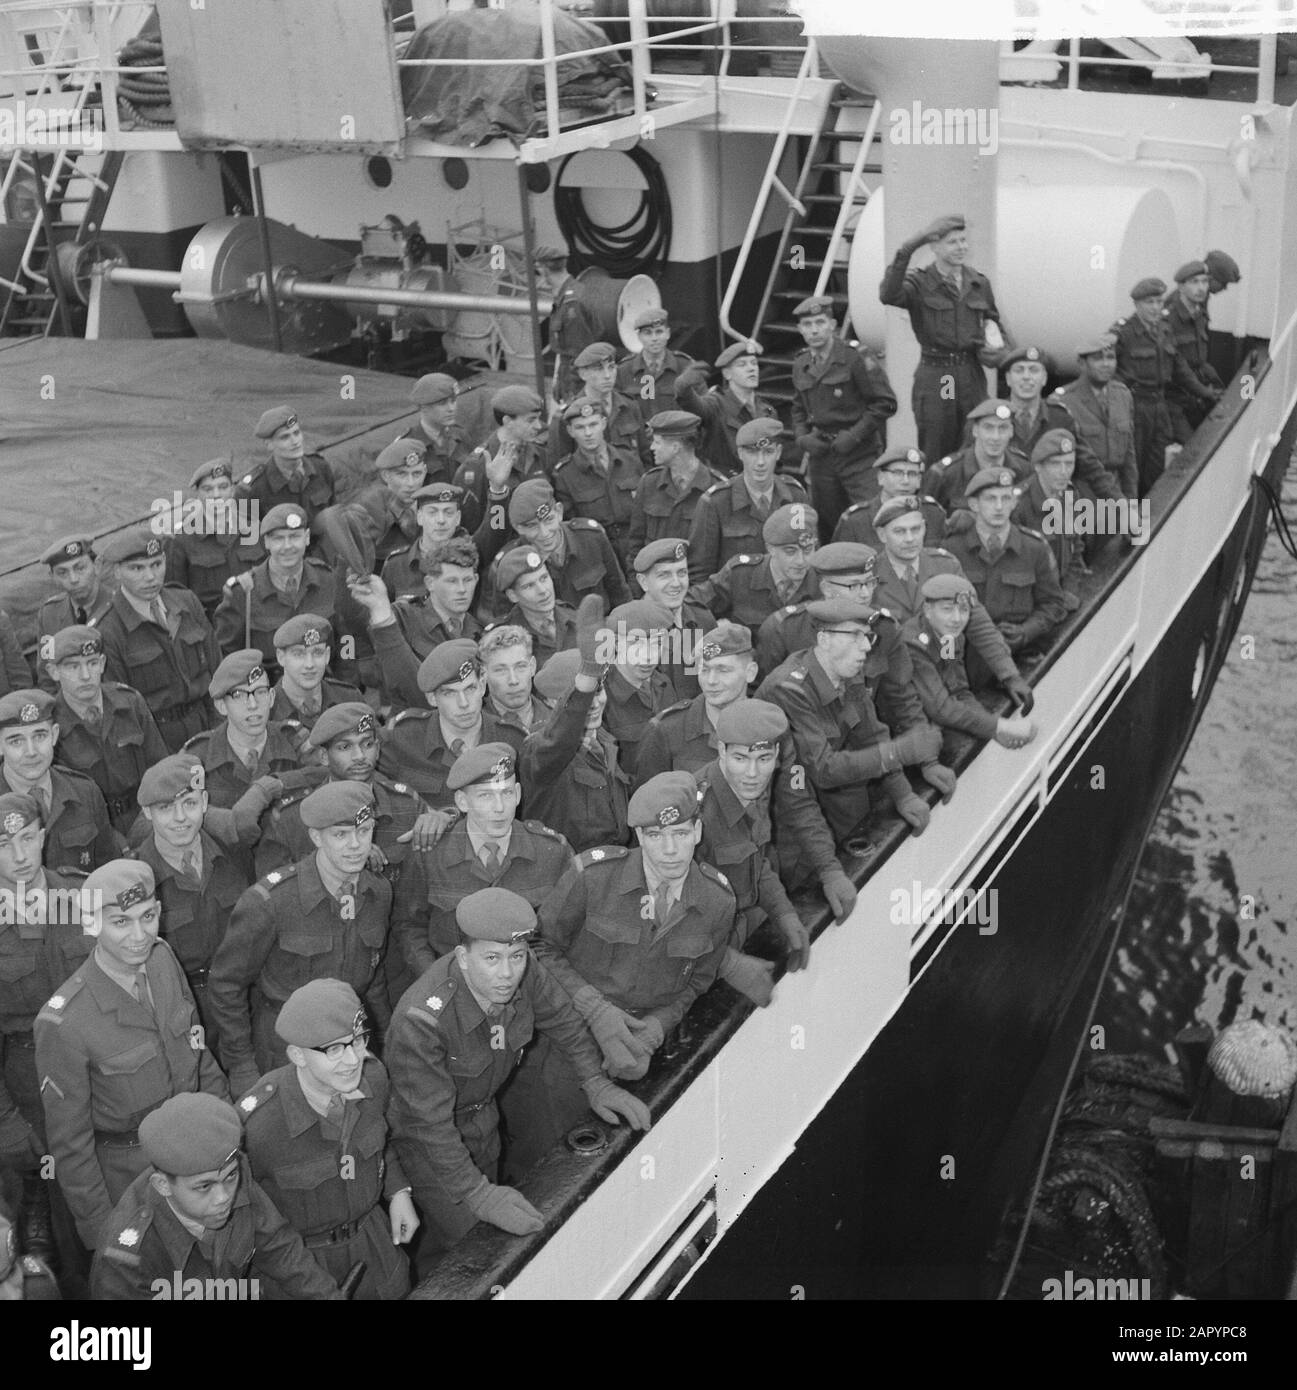 Departure first detachment of the first Surinamese company per Ms. Willemstad to Suriname Date: 13 January 1961 Location: Suriname Keywords: COMPAGNIES, DETACHEMENTS, leaving Institution name: MS Willemstad Stock Photo